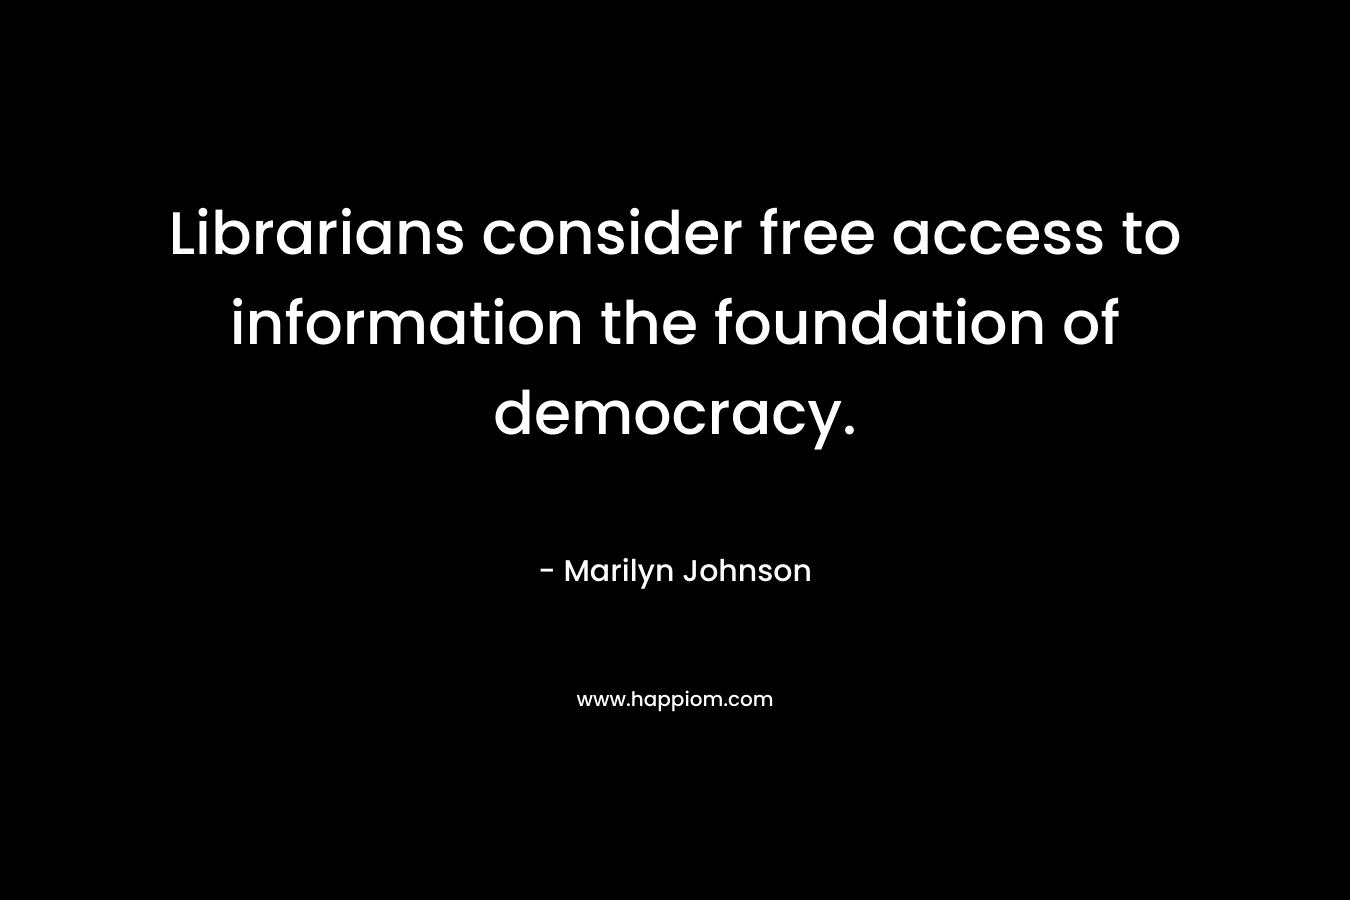 Librarians consider free access to information the foundation of democracy. – Marilyn Johnson